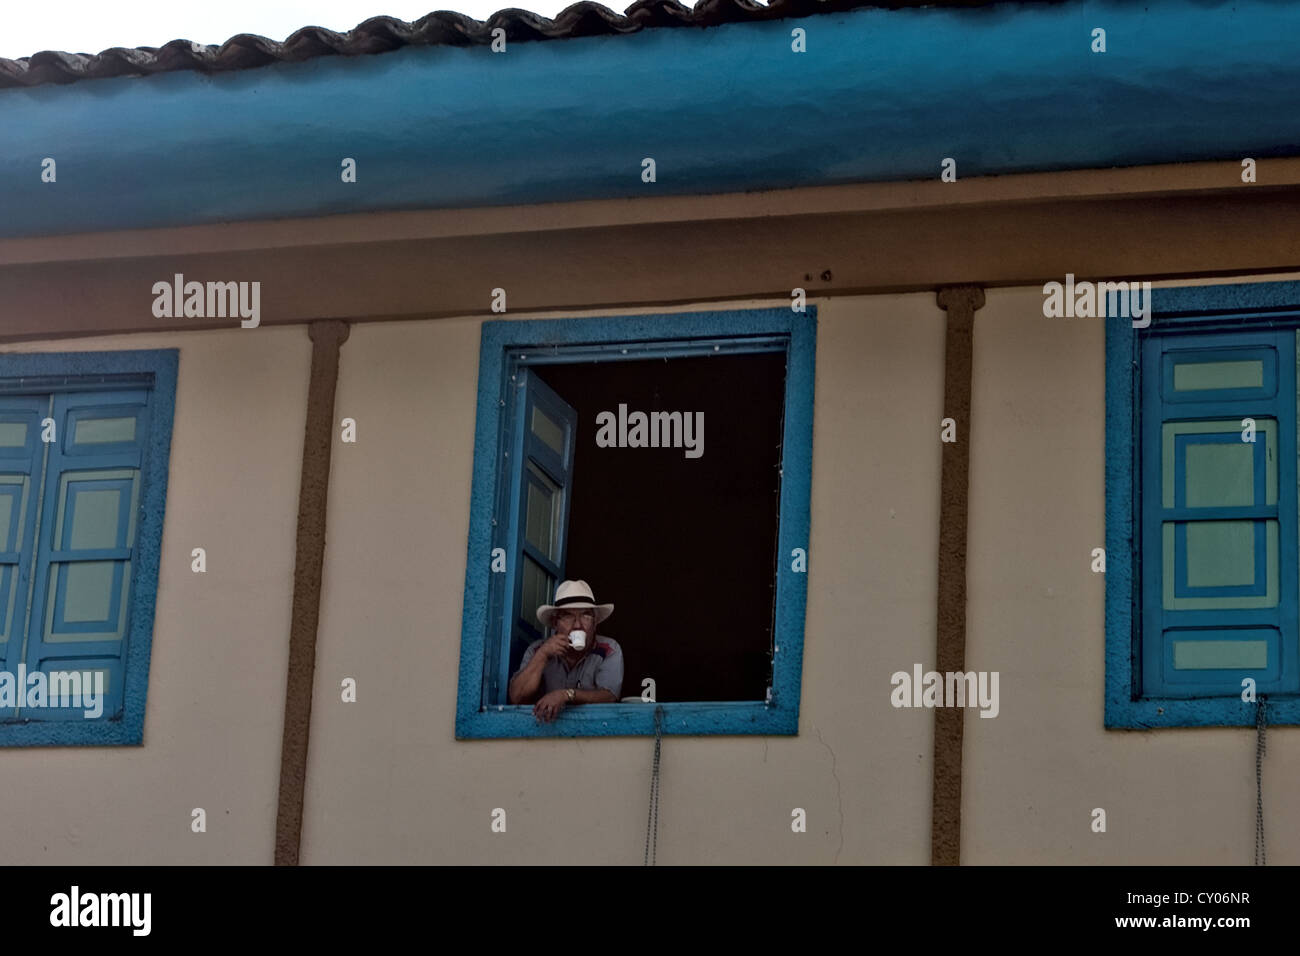 Man drinking coffee, Colourful building, Solento, Colombia Stock Photo